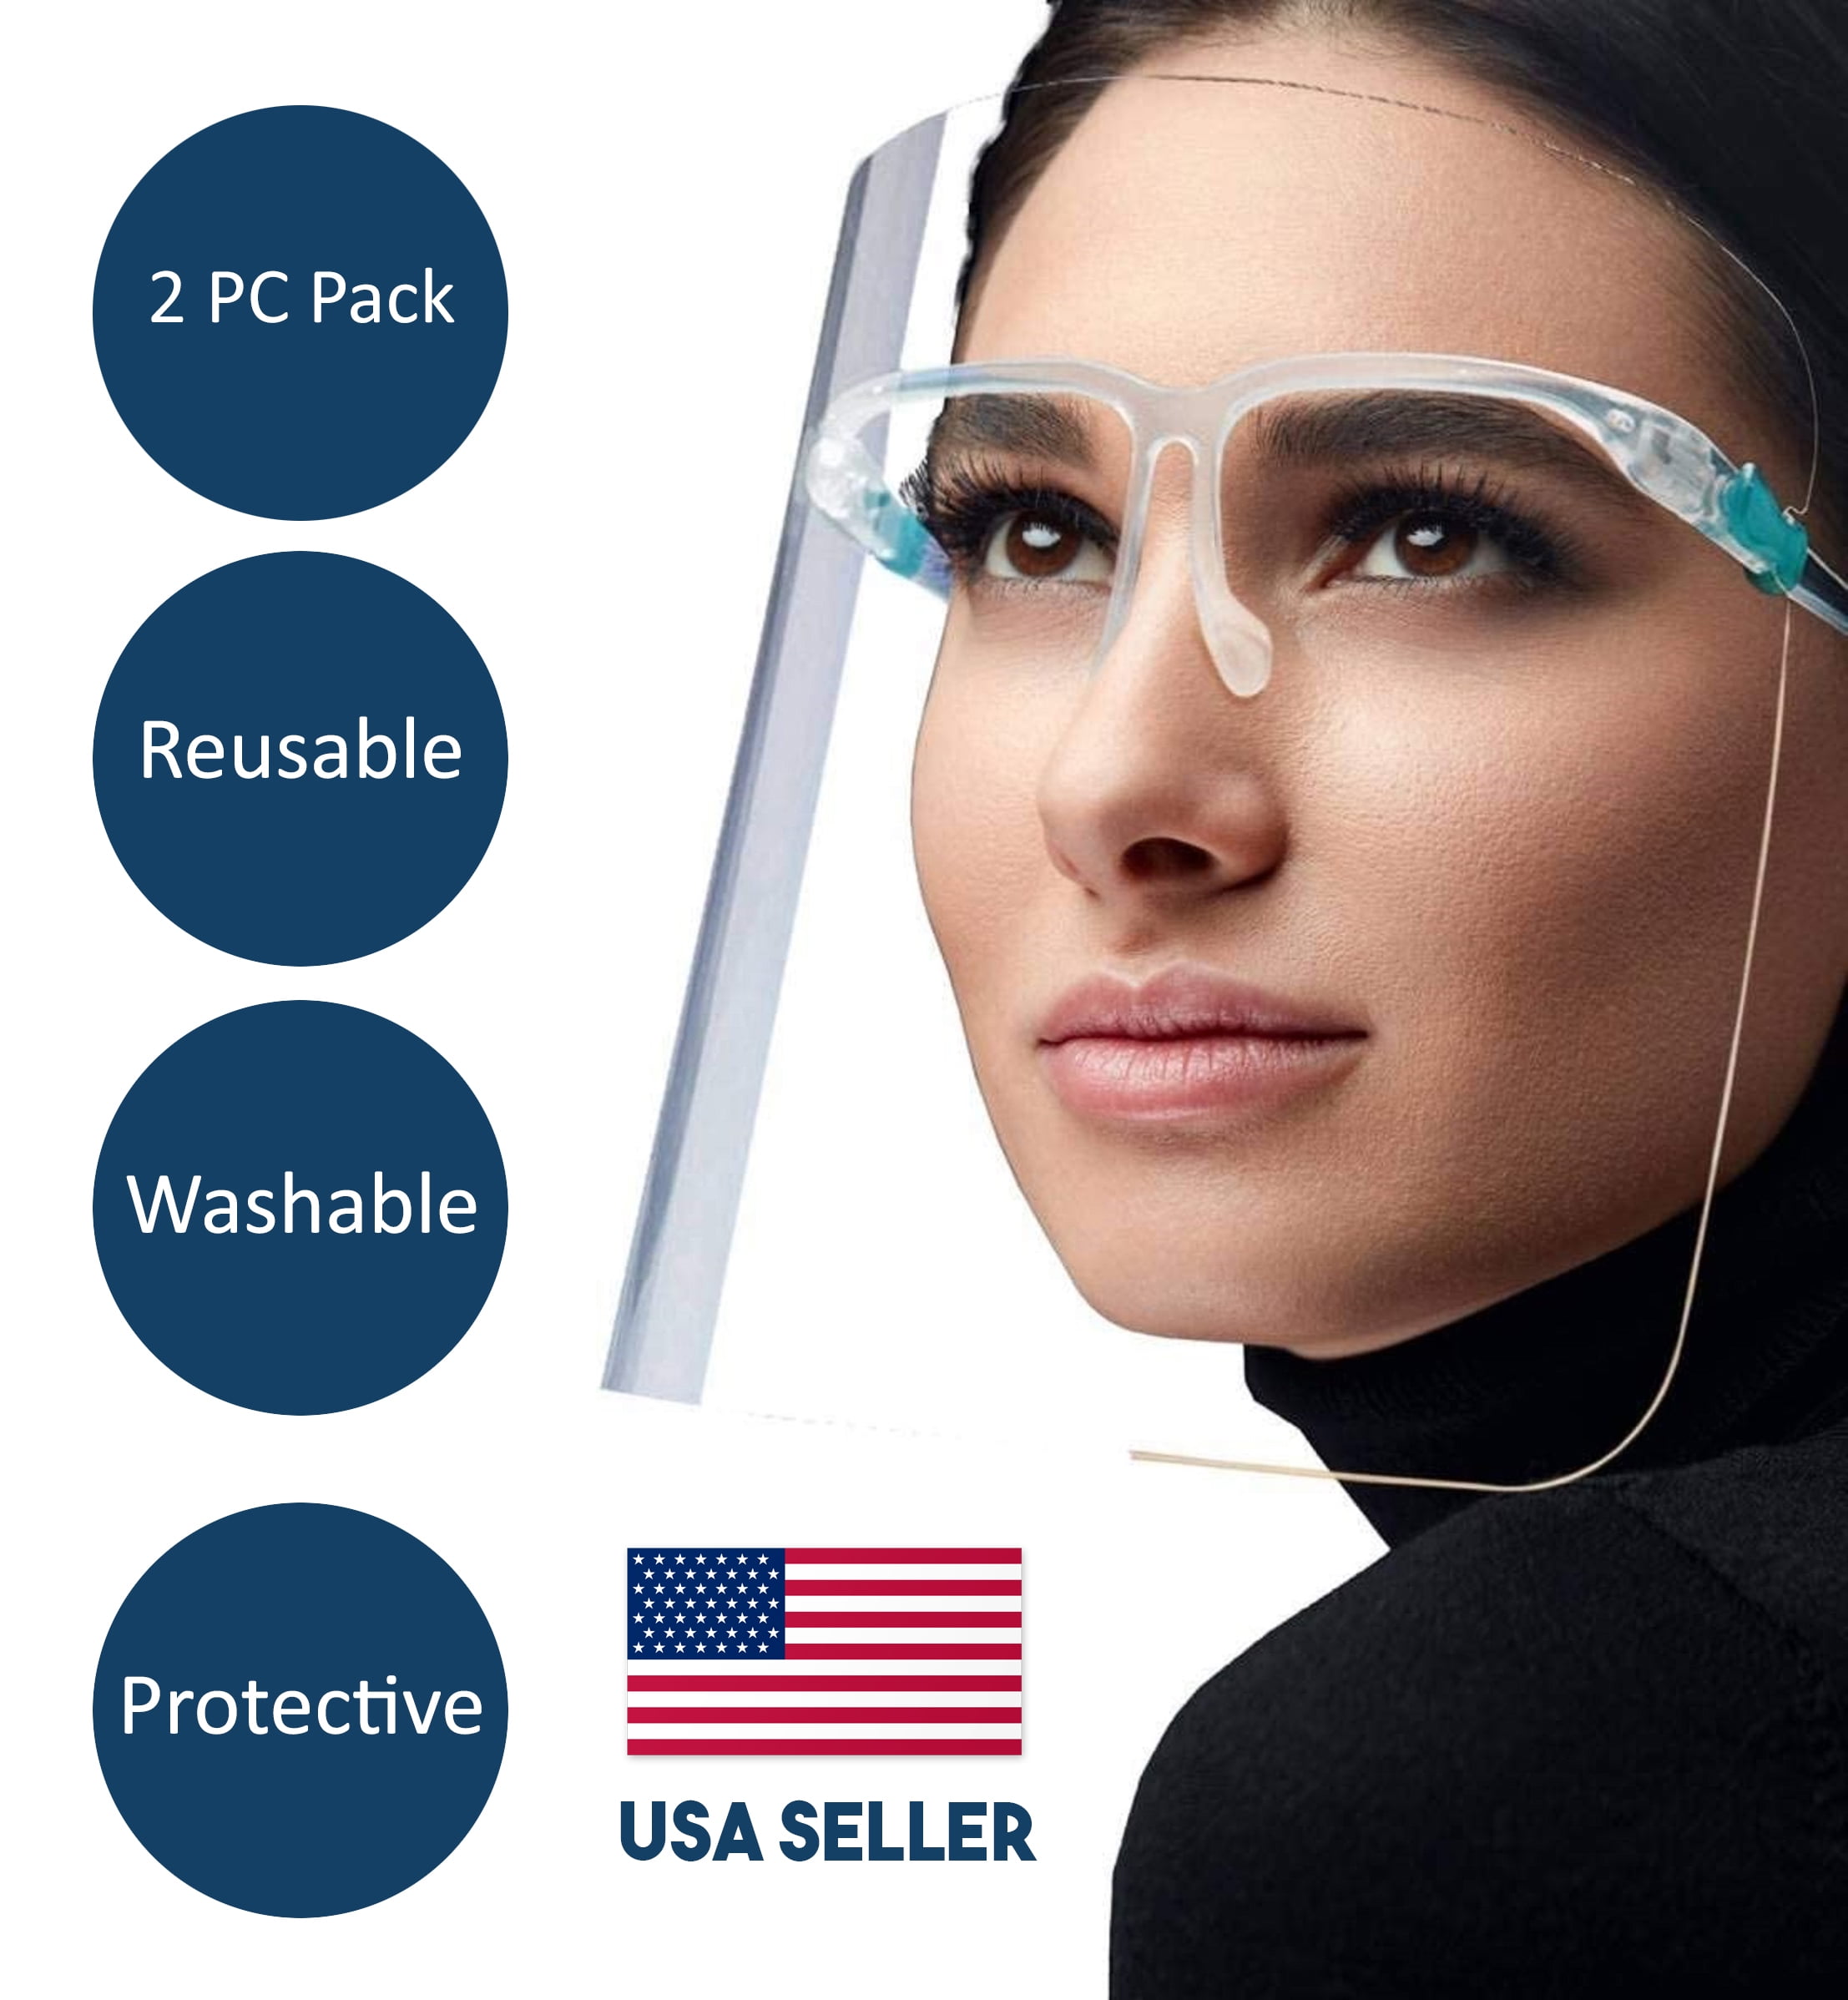 2Pc Clear Plastic Face Shield Safety Protection Visor With Plastic Film Glasses 